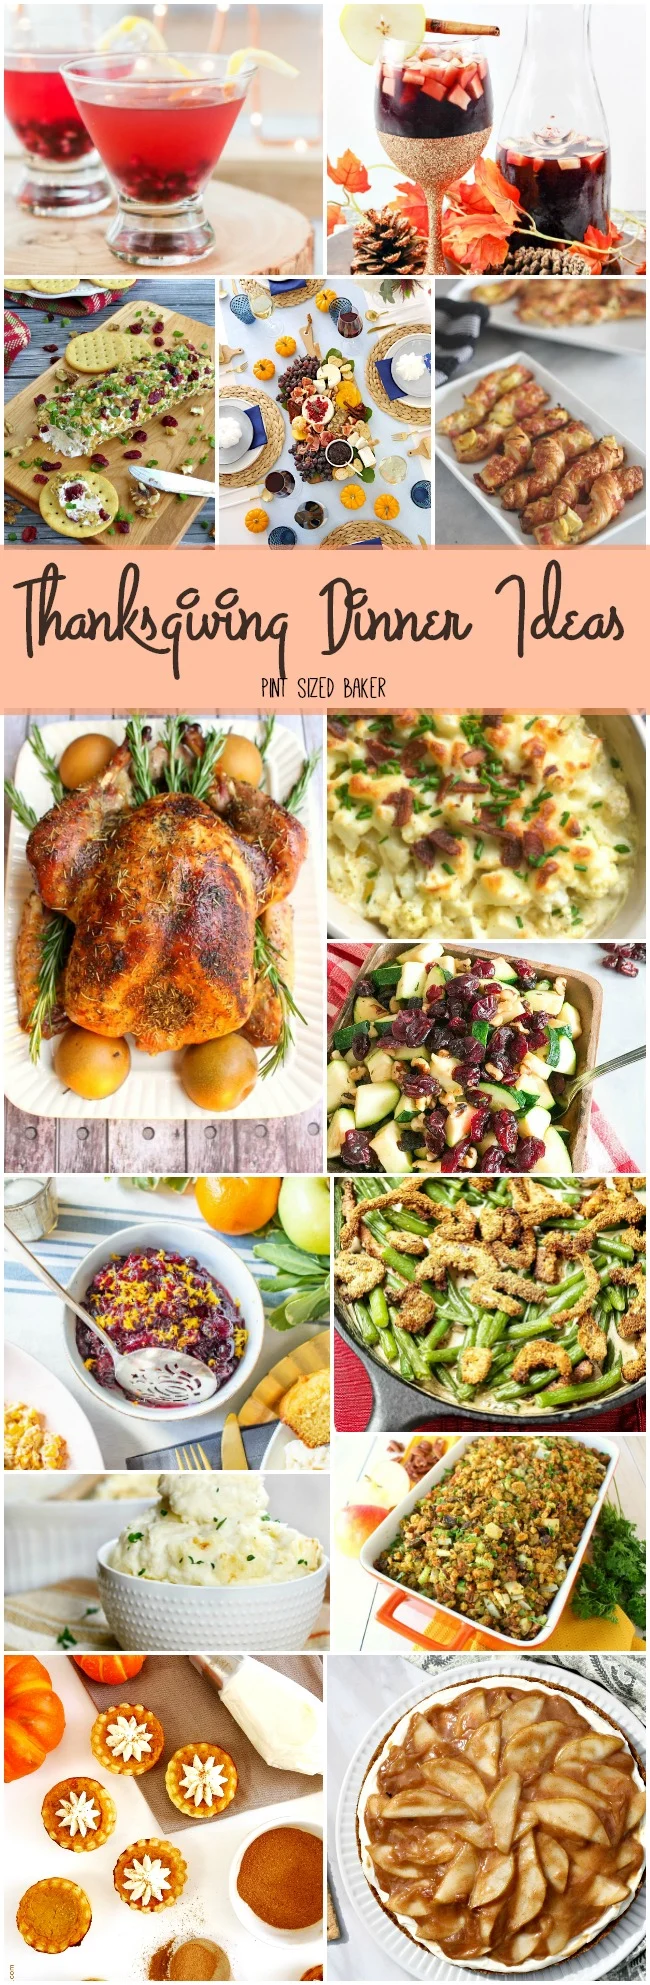 Here's fifteen Thanksgiving Dinner Ideas from drinks, to appetizers, the main course and of course desserts. Get some great recipes for your holiday.